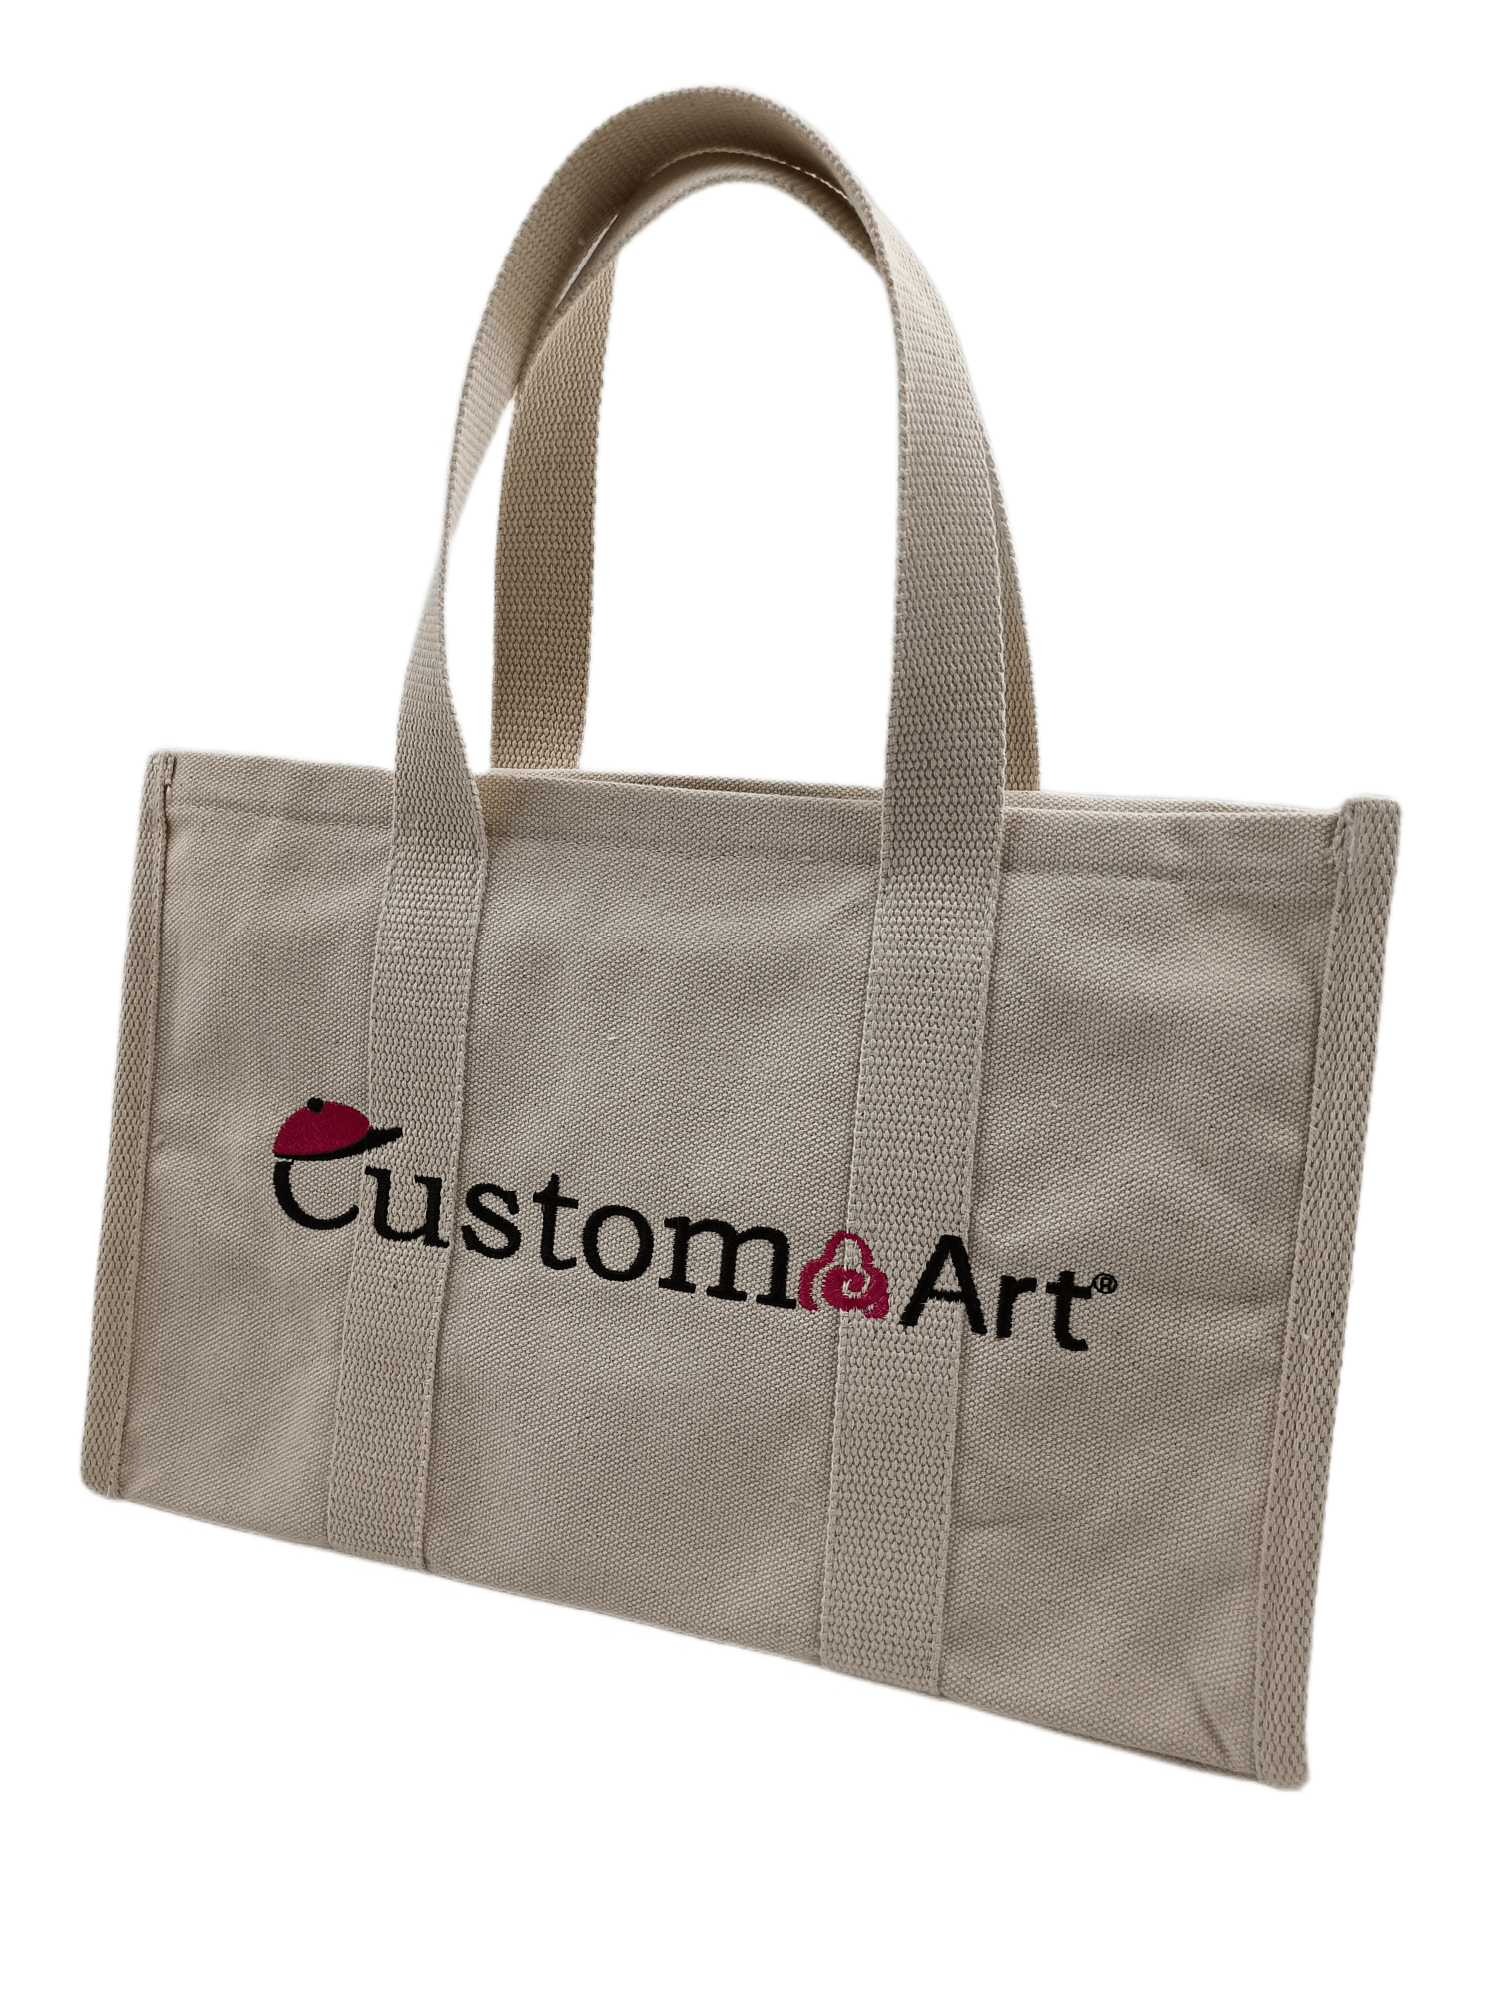 How can I make digital prints on cotton canvas tote bags